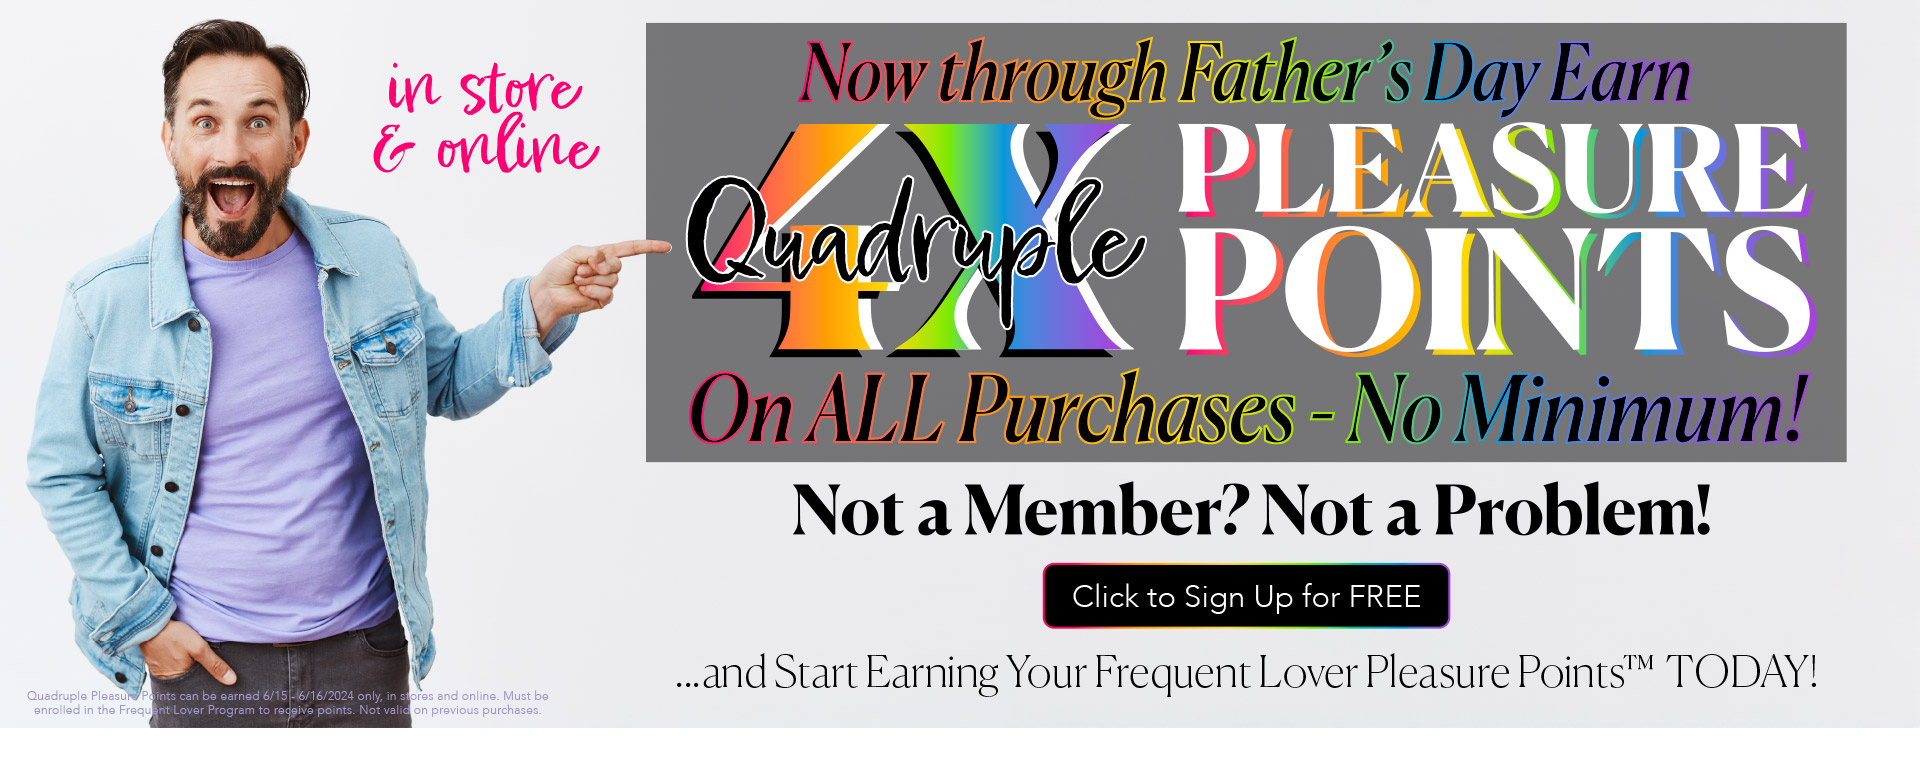 Now through Father's Day Earn QUADRUPLE Pleasure Points on all purchases - No Minimum - Not a Member? Not a problem! Signing up is FREE!